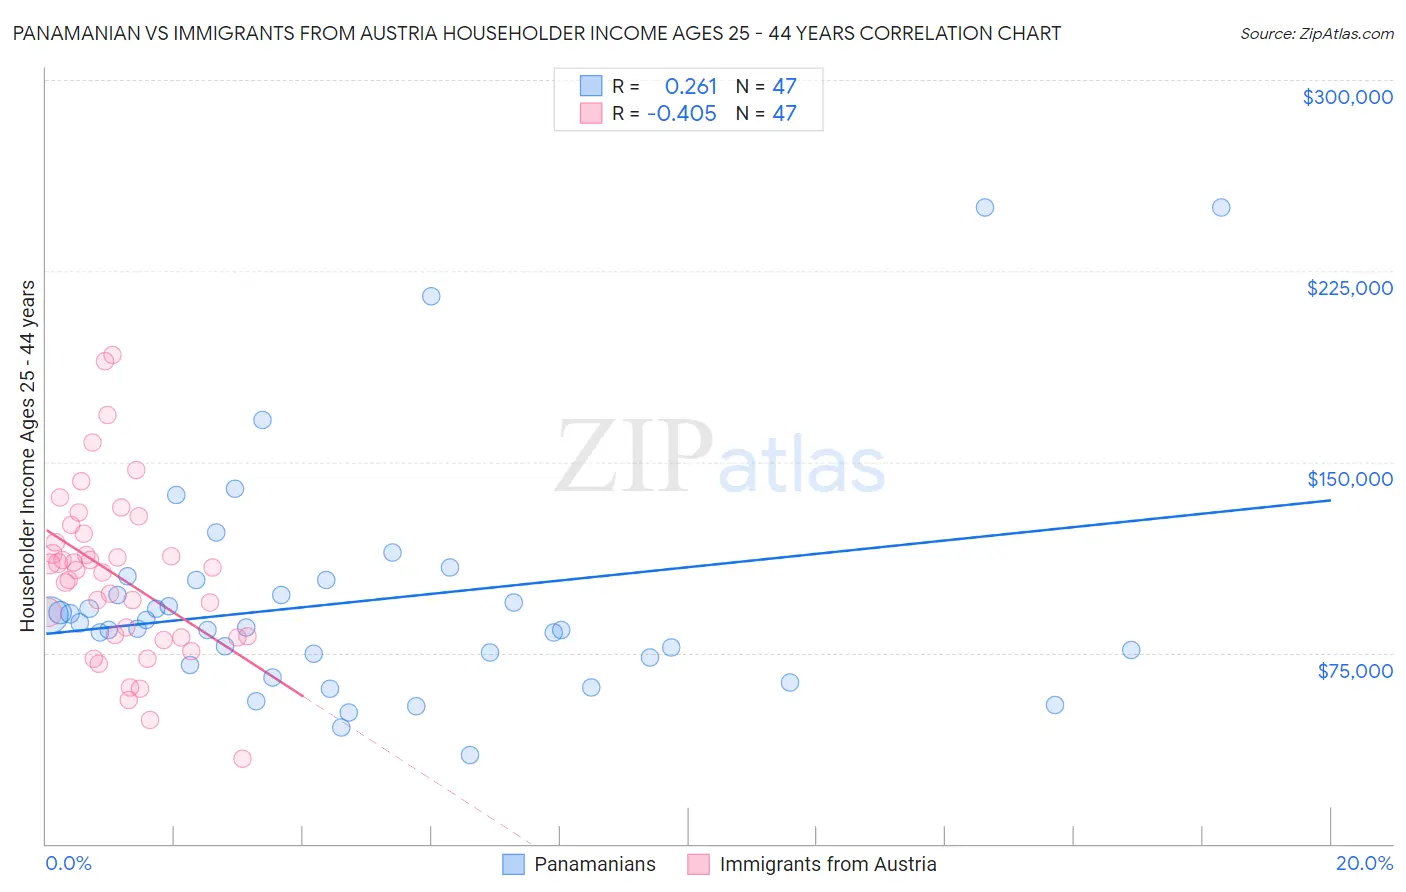 Panamanian vs Immigrants from Austria Householder Income Ages 25 - 44 years